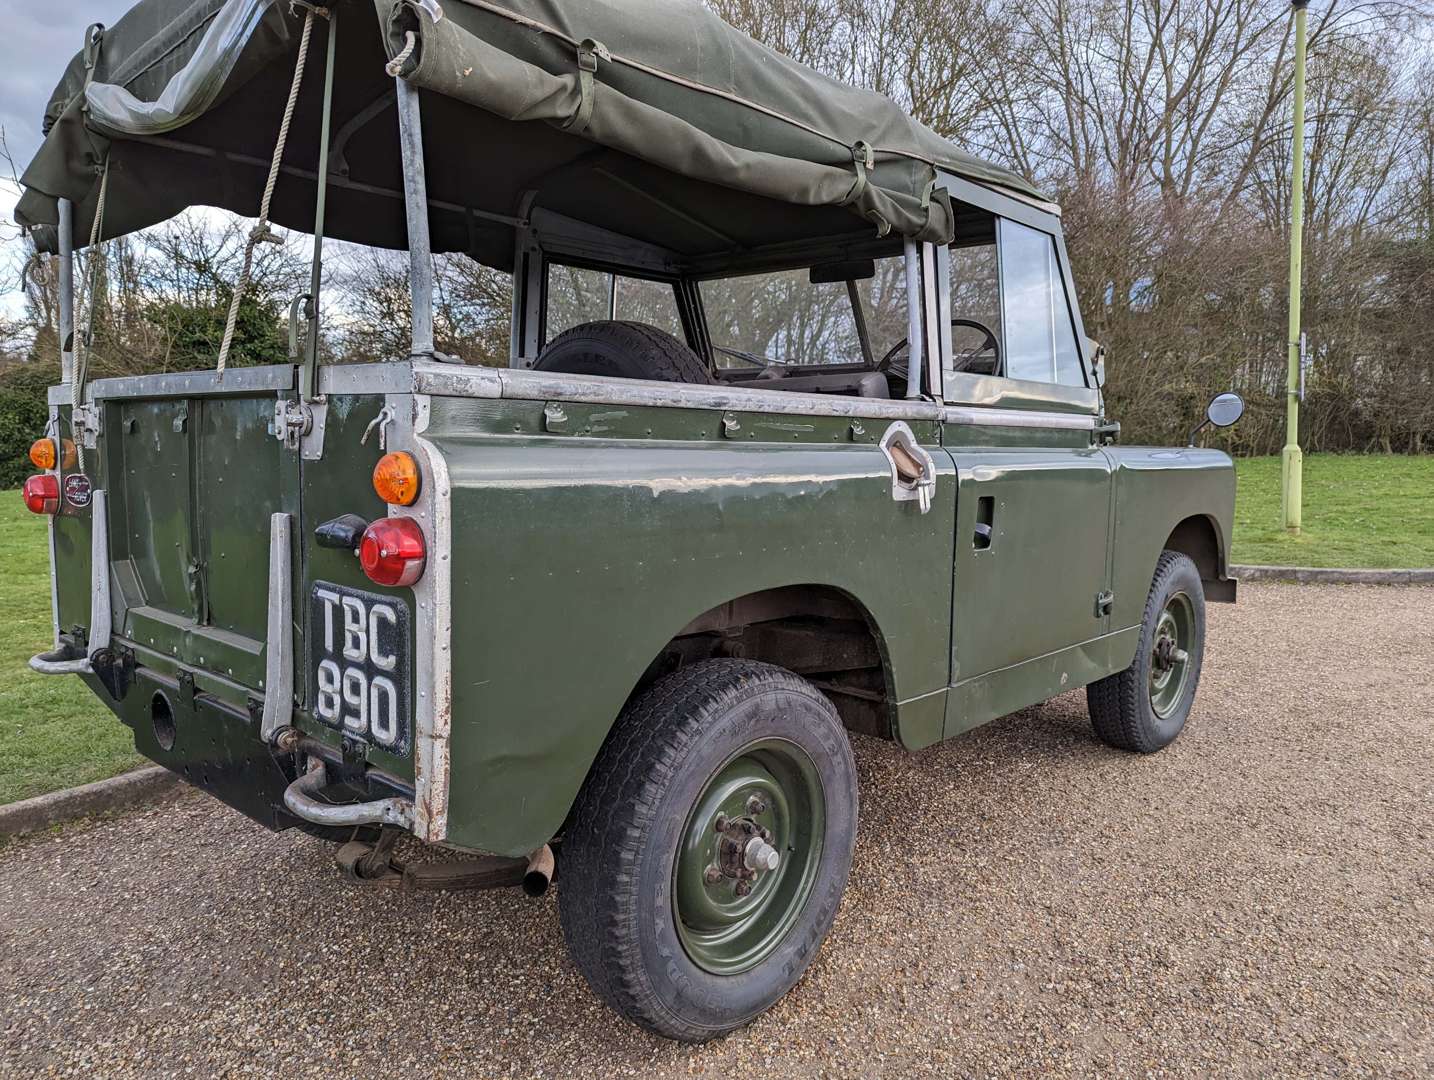 1958 LAND ROVER SWB SERIES II - Image 10 of 26